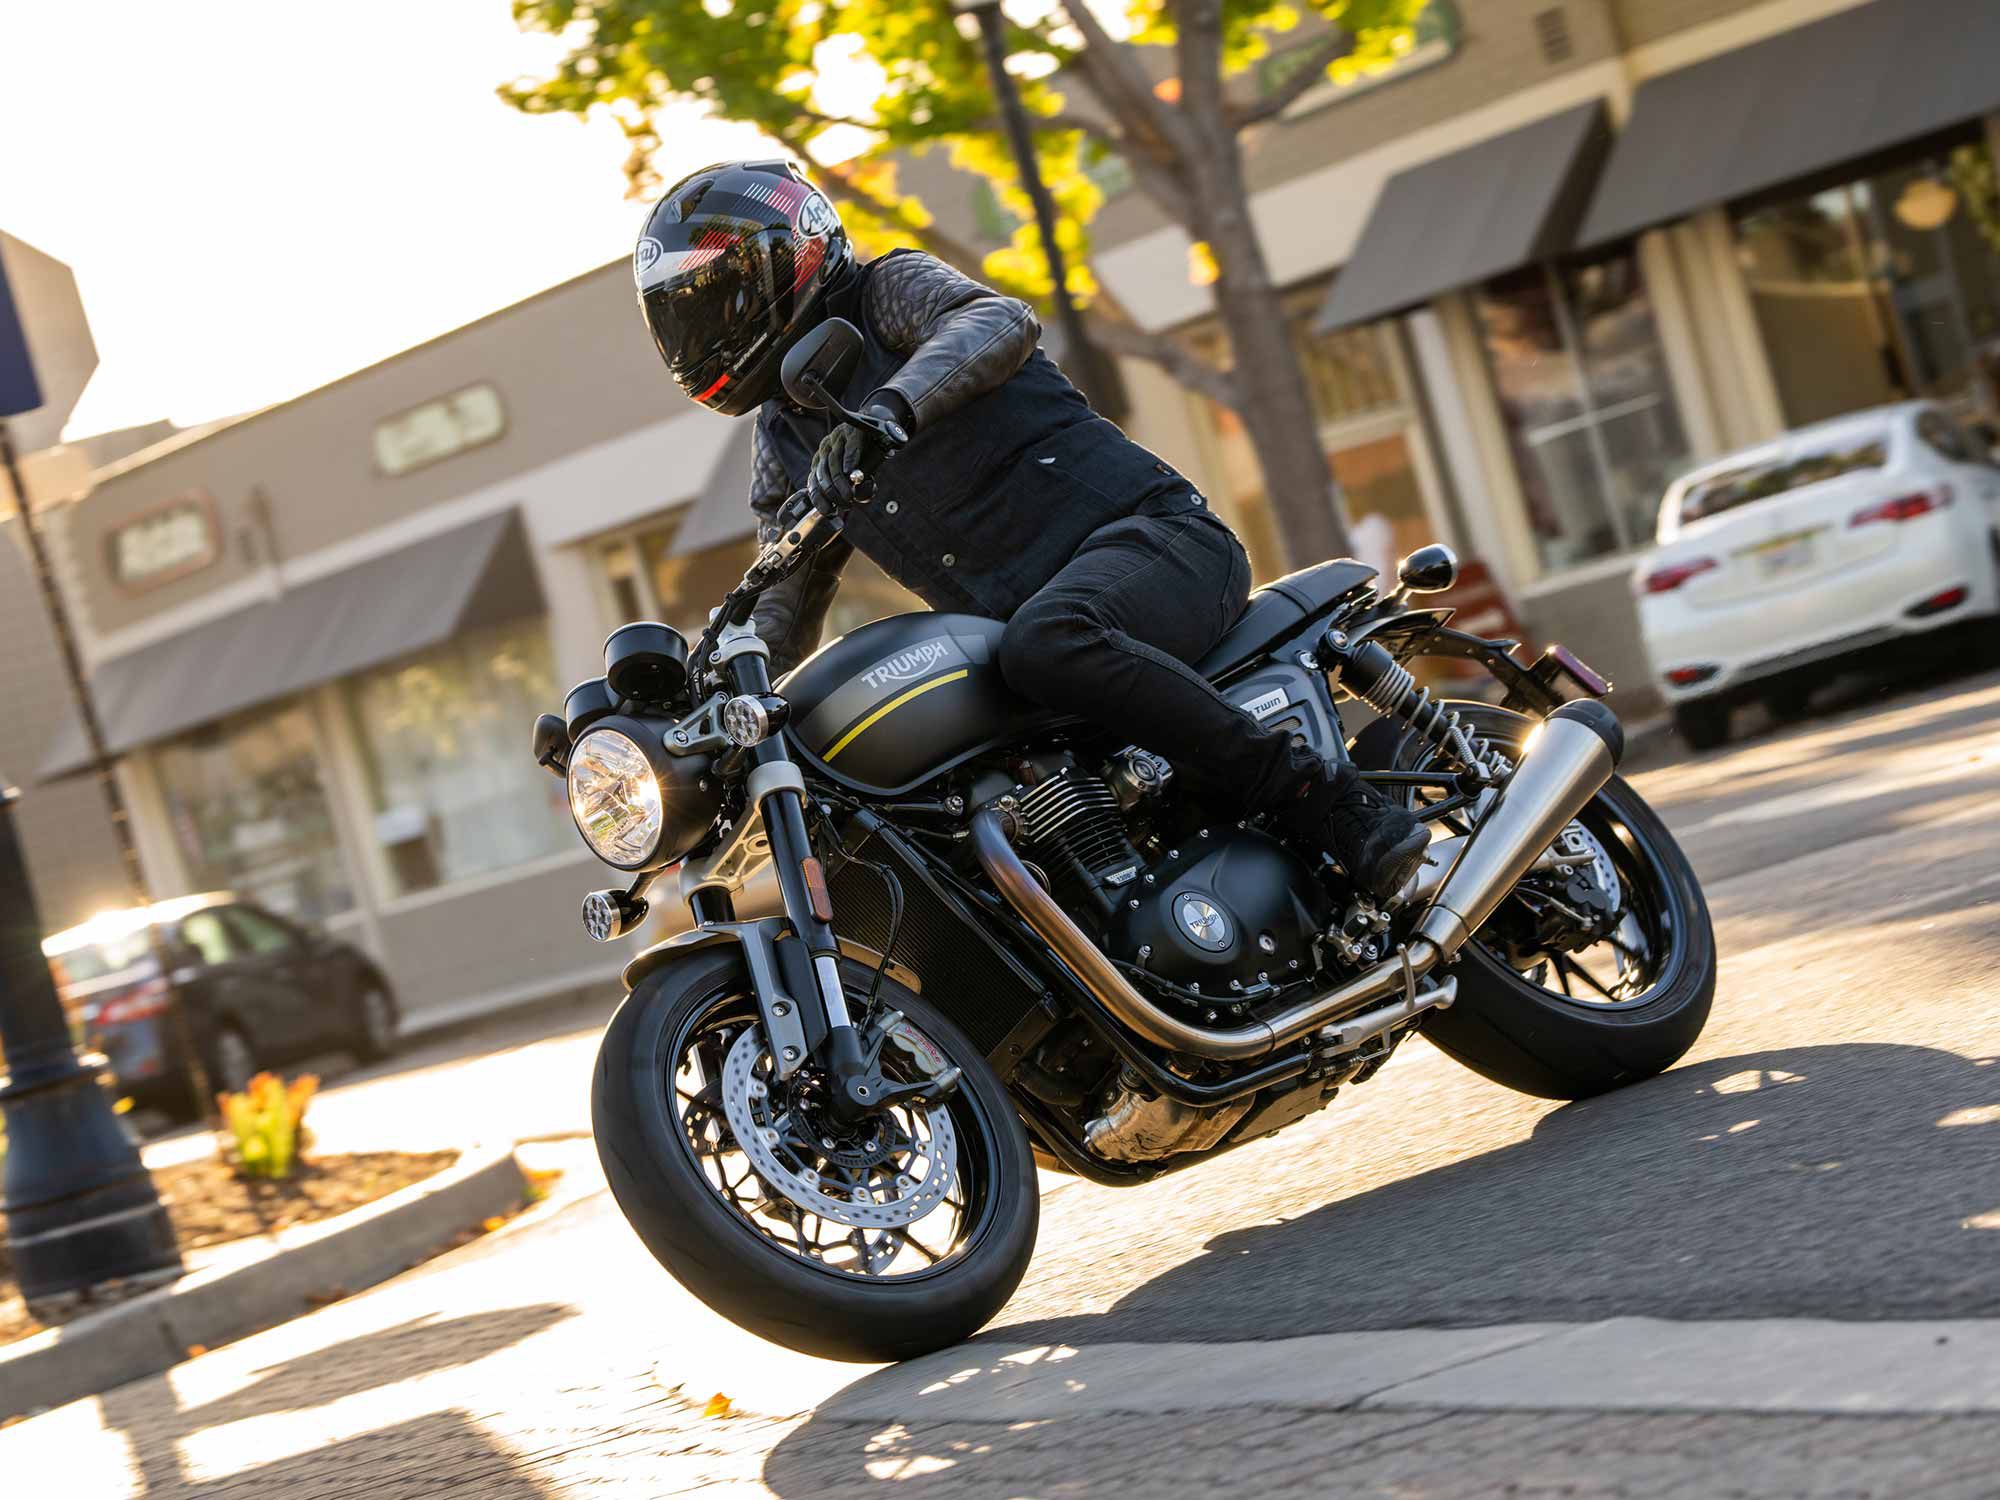 Few motorcycle manufacturers pair old-school character and modern riding dynamic like Triumph Motorcycles and its Speed Twin.